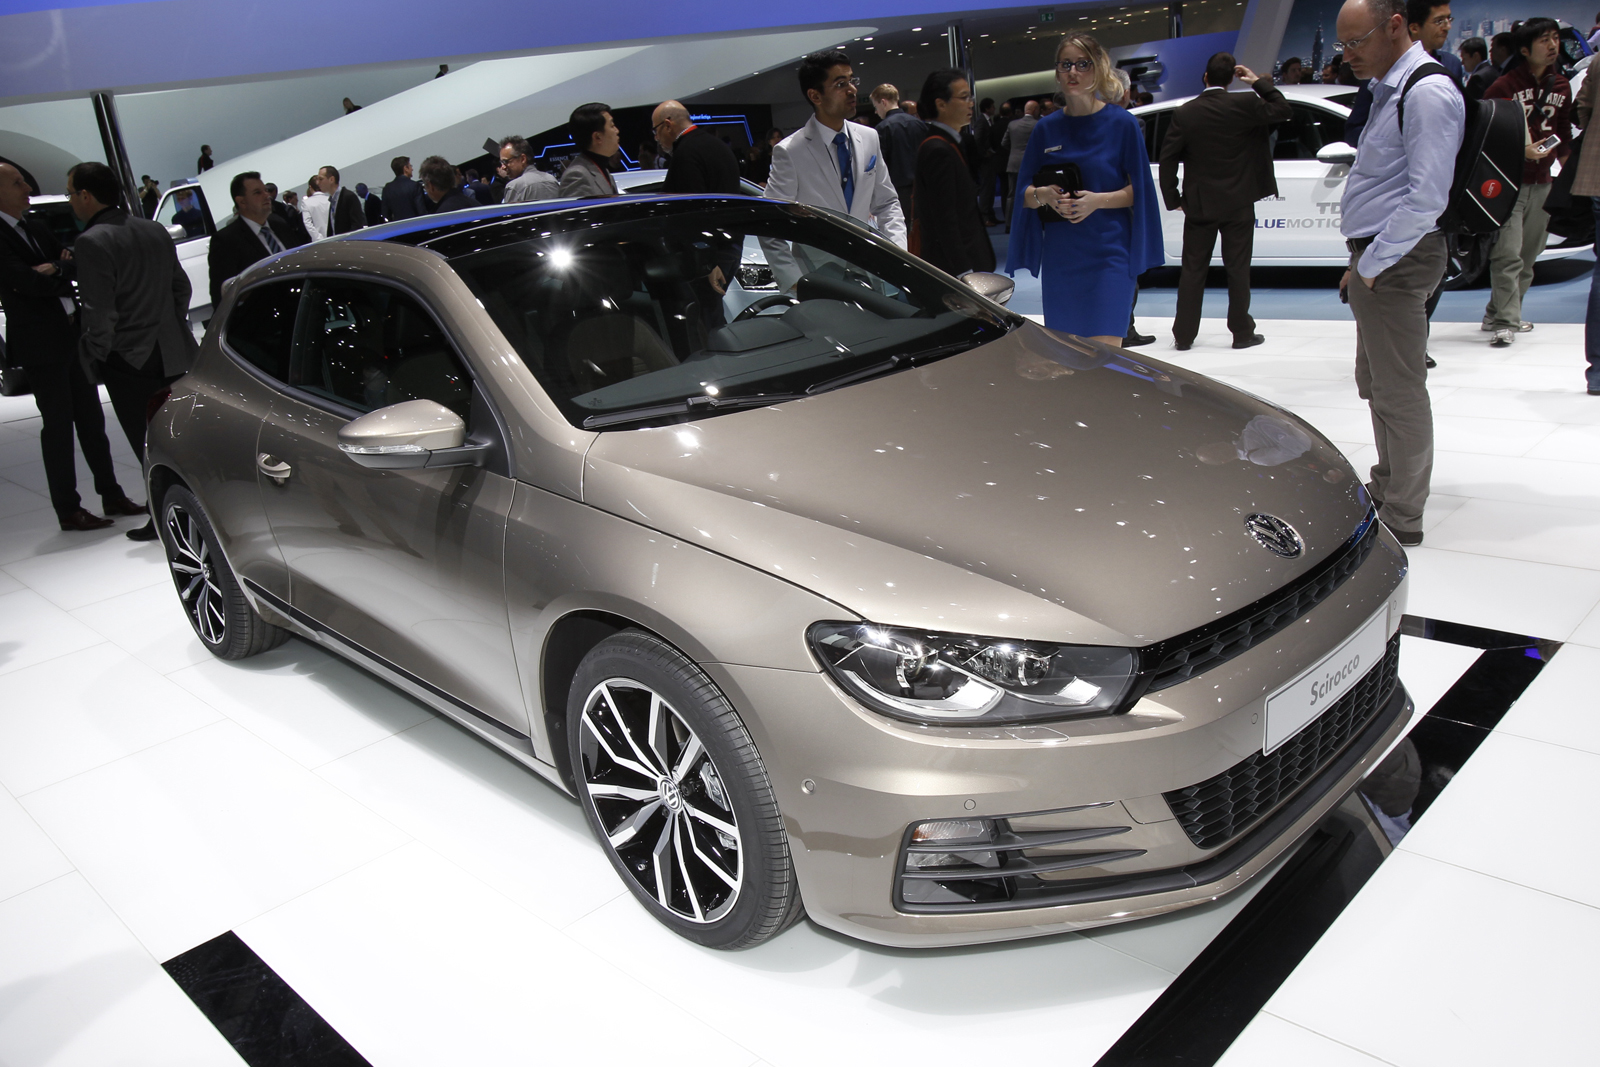 Volkswagen Scirocco R Officially Revealed